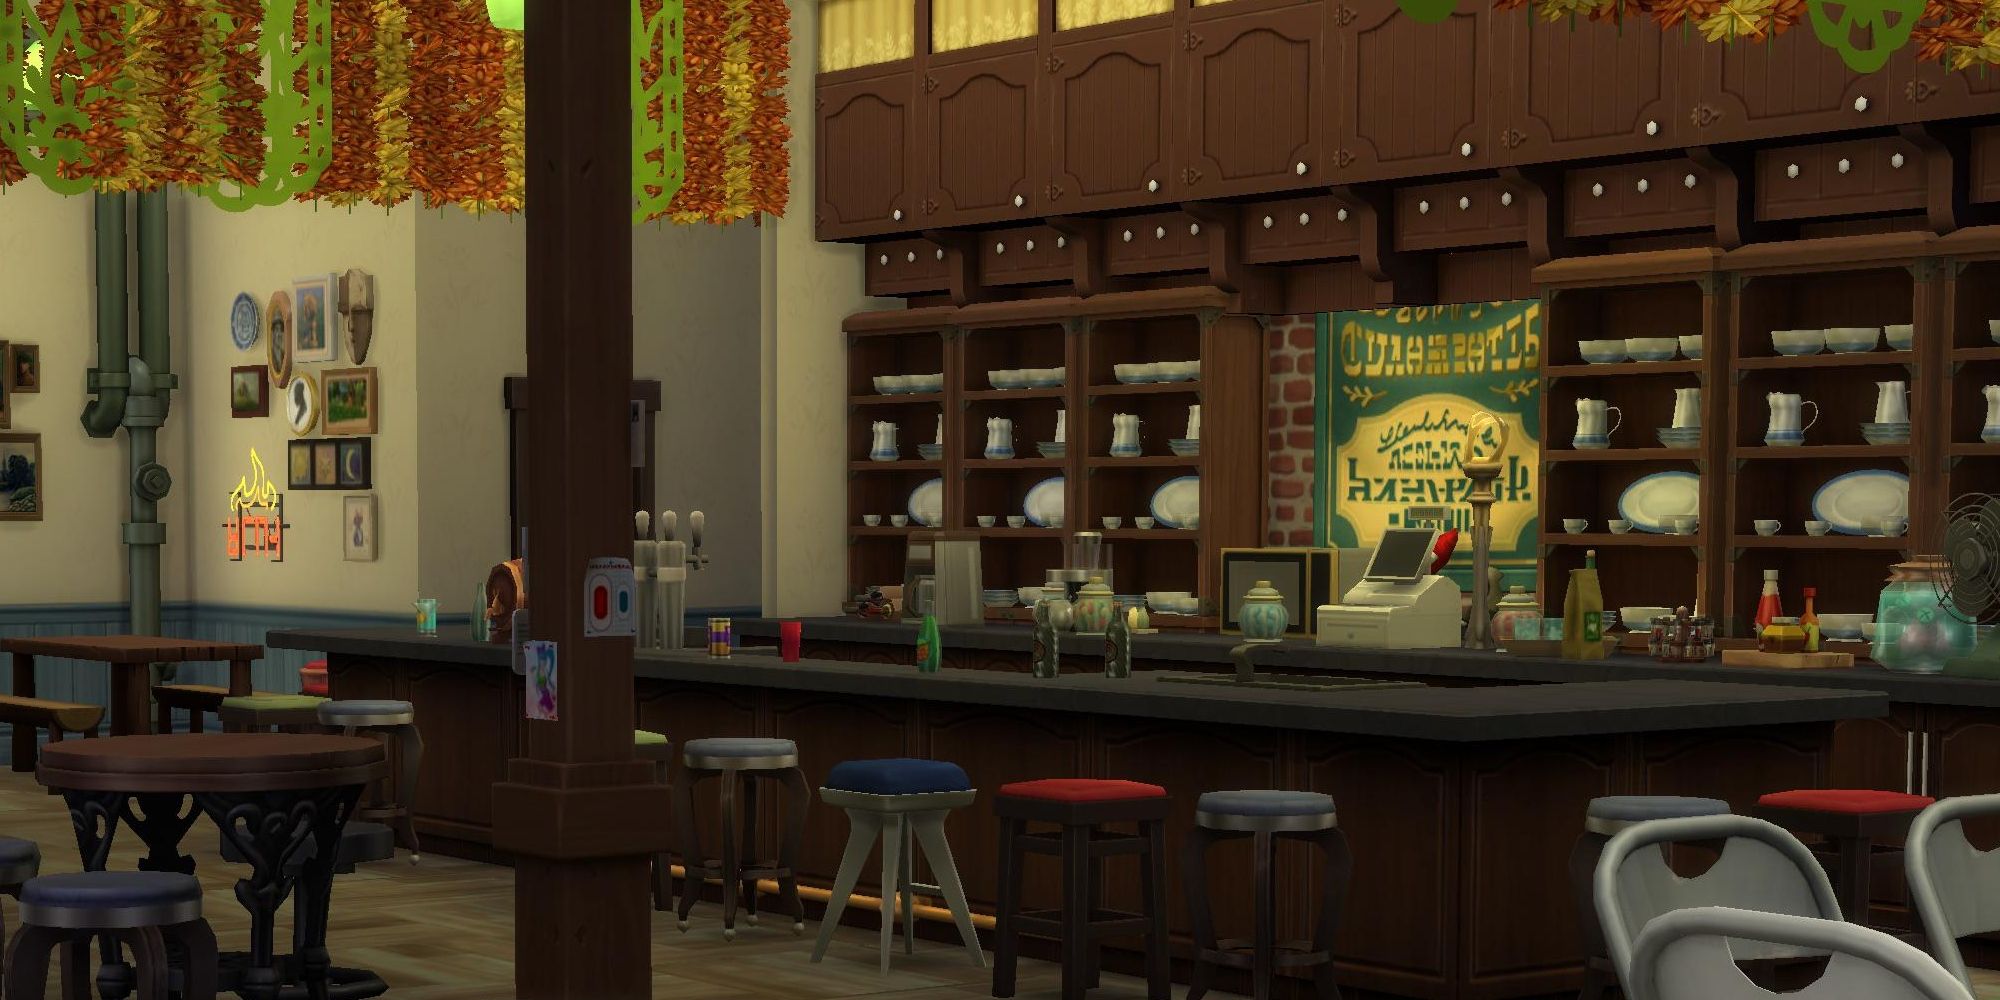 IASIP's Paddy's Pub in The Sims 4.